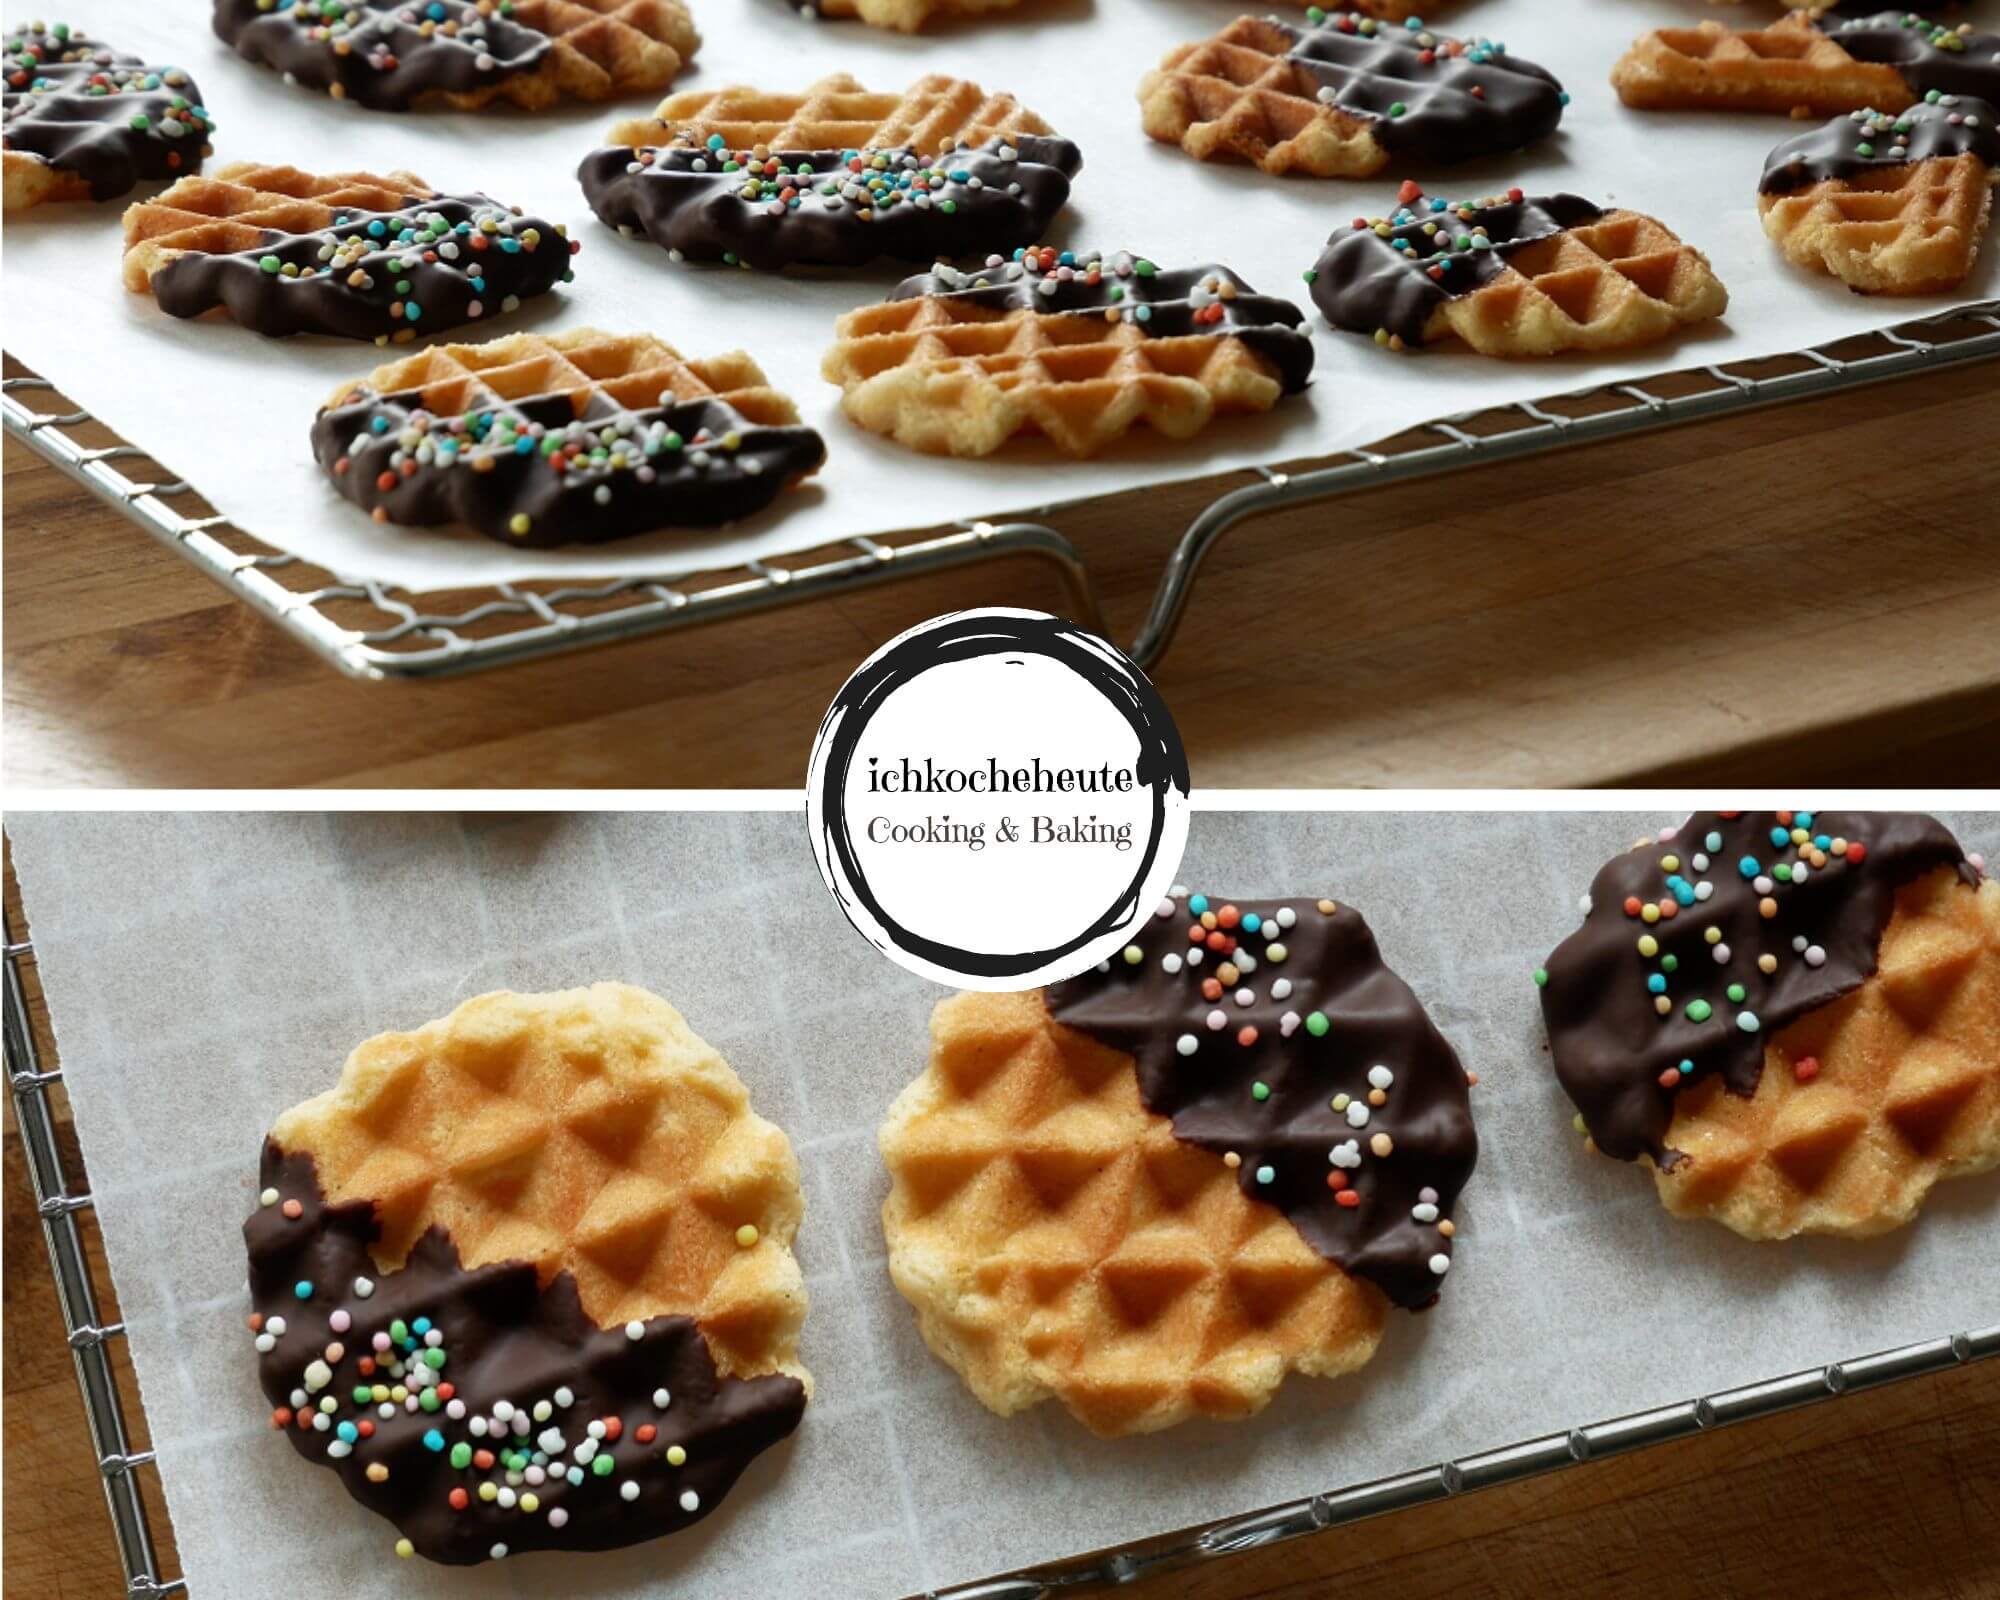 Serving Waffle Cookies with Chocolate